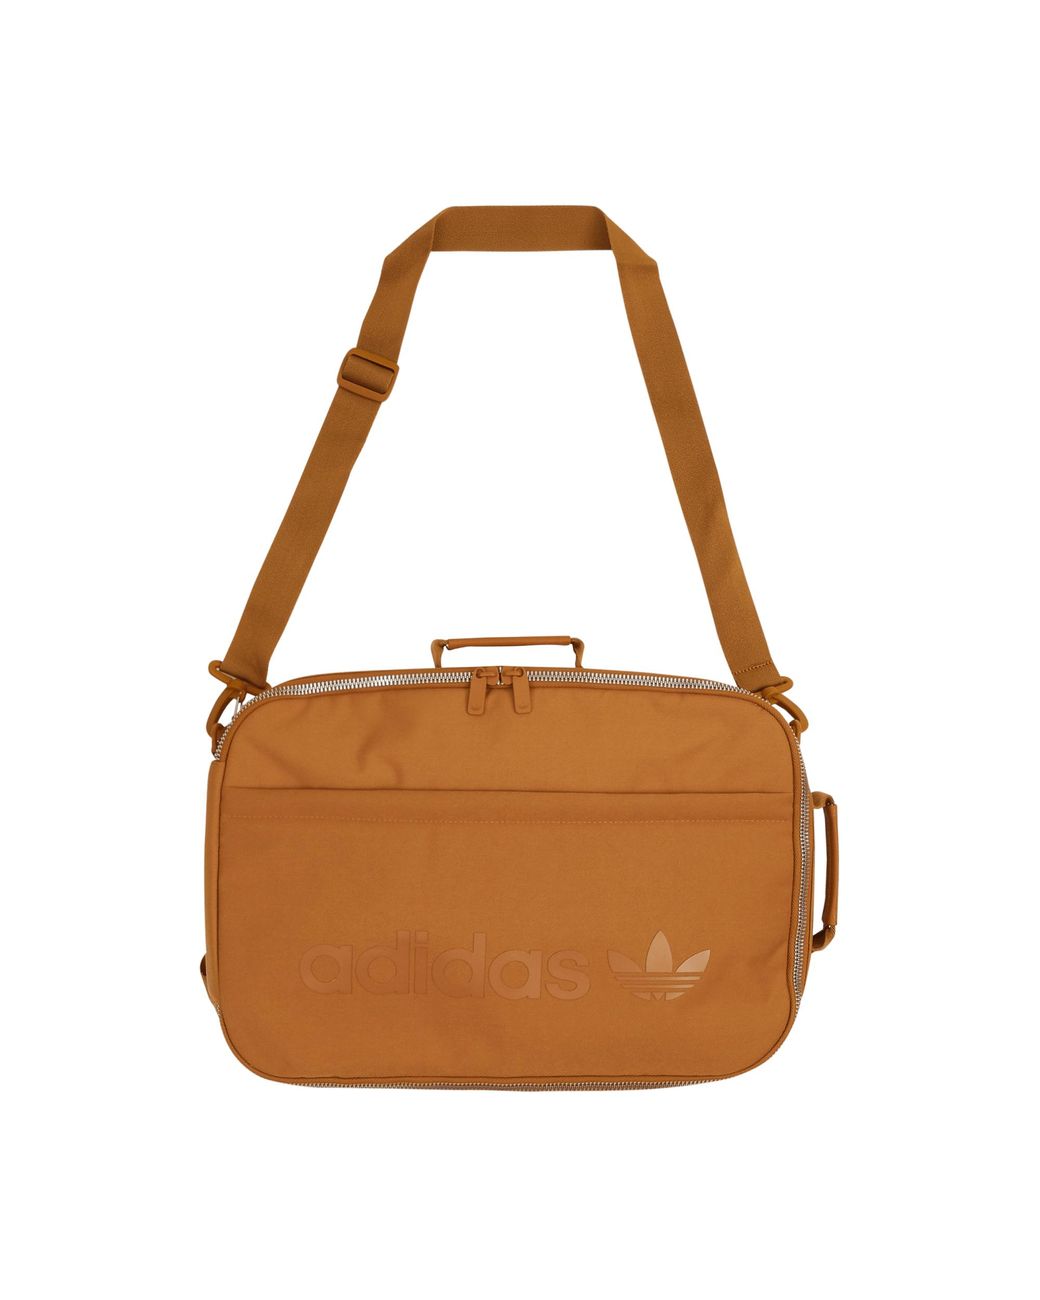 adidas Originals Synthetic Mod Airliner 3w Bag in Brown for Men - Lyst